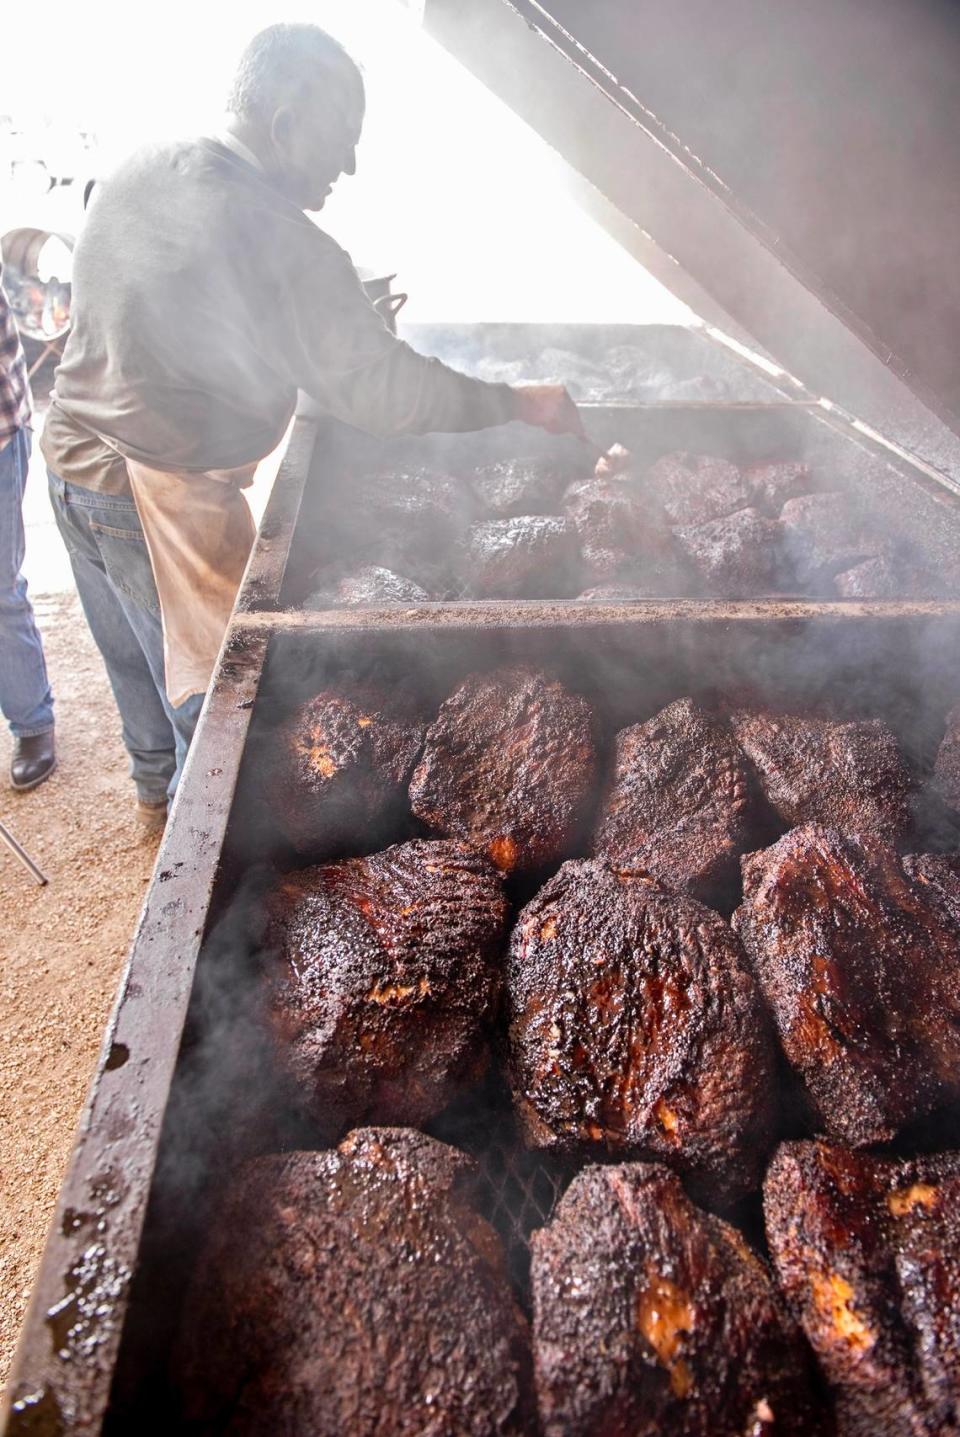 Briskets on the open mesquite pit at Perini Ranch Steakhouse. Handout photo